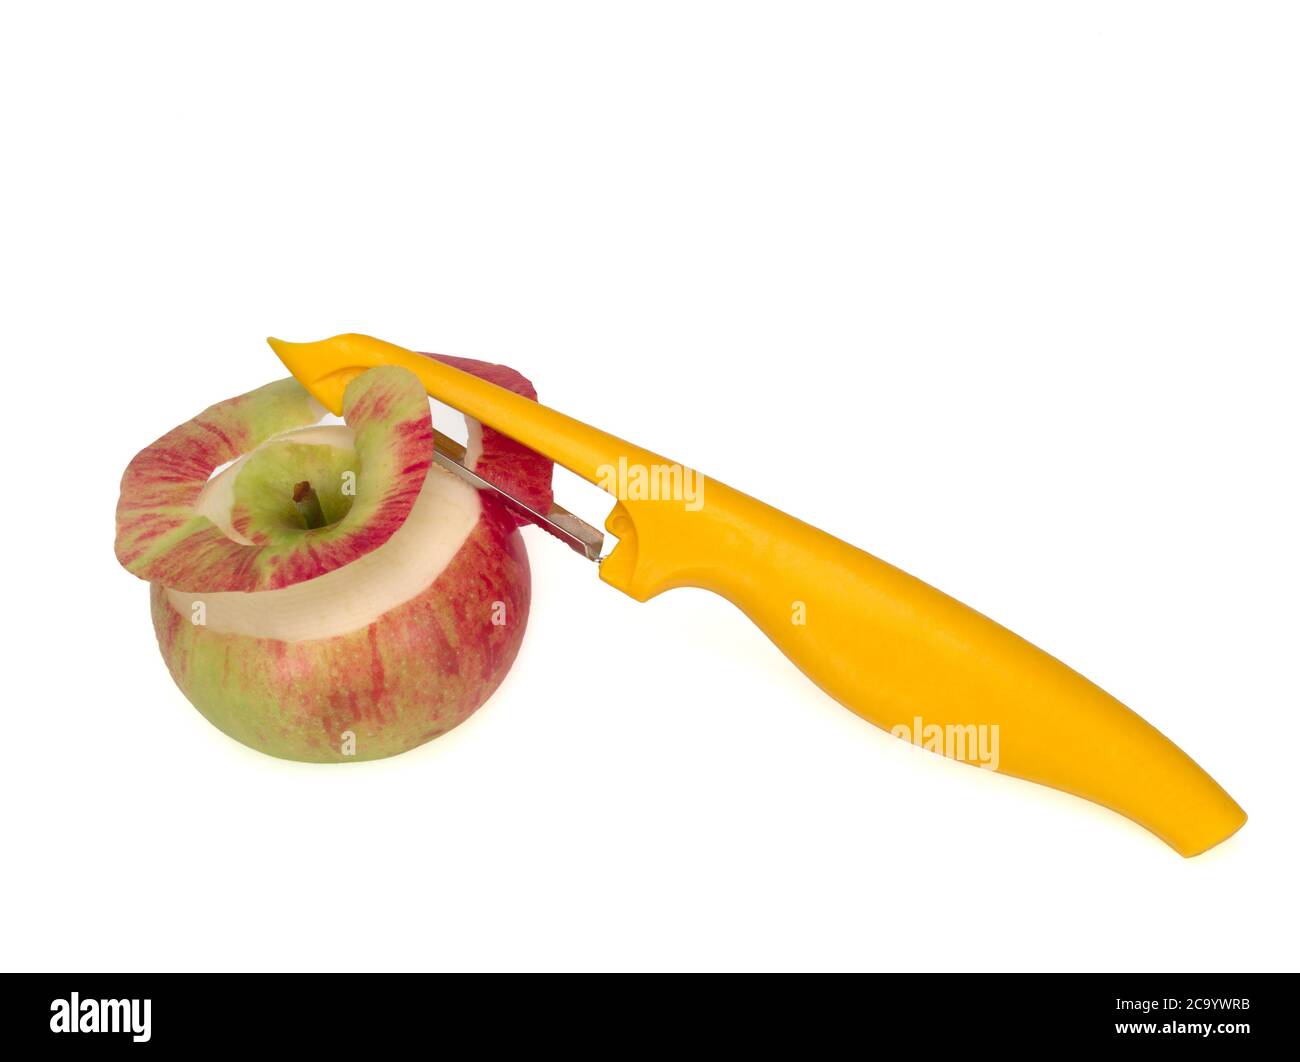 https://c8.alamy.com/comp/2C9YWRB/yellow-peeler-used-to-peel-an-apple-on-white-background-knife-peeler-for-vegetables-and-fruits-2C9YWRB.jpg